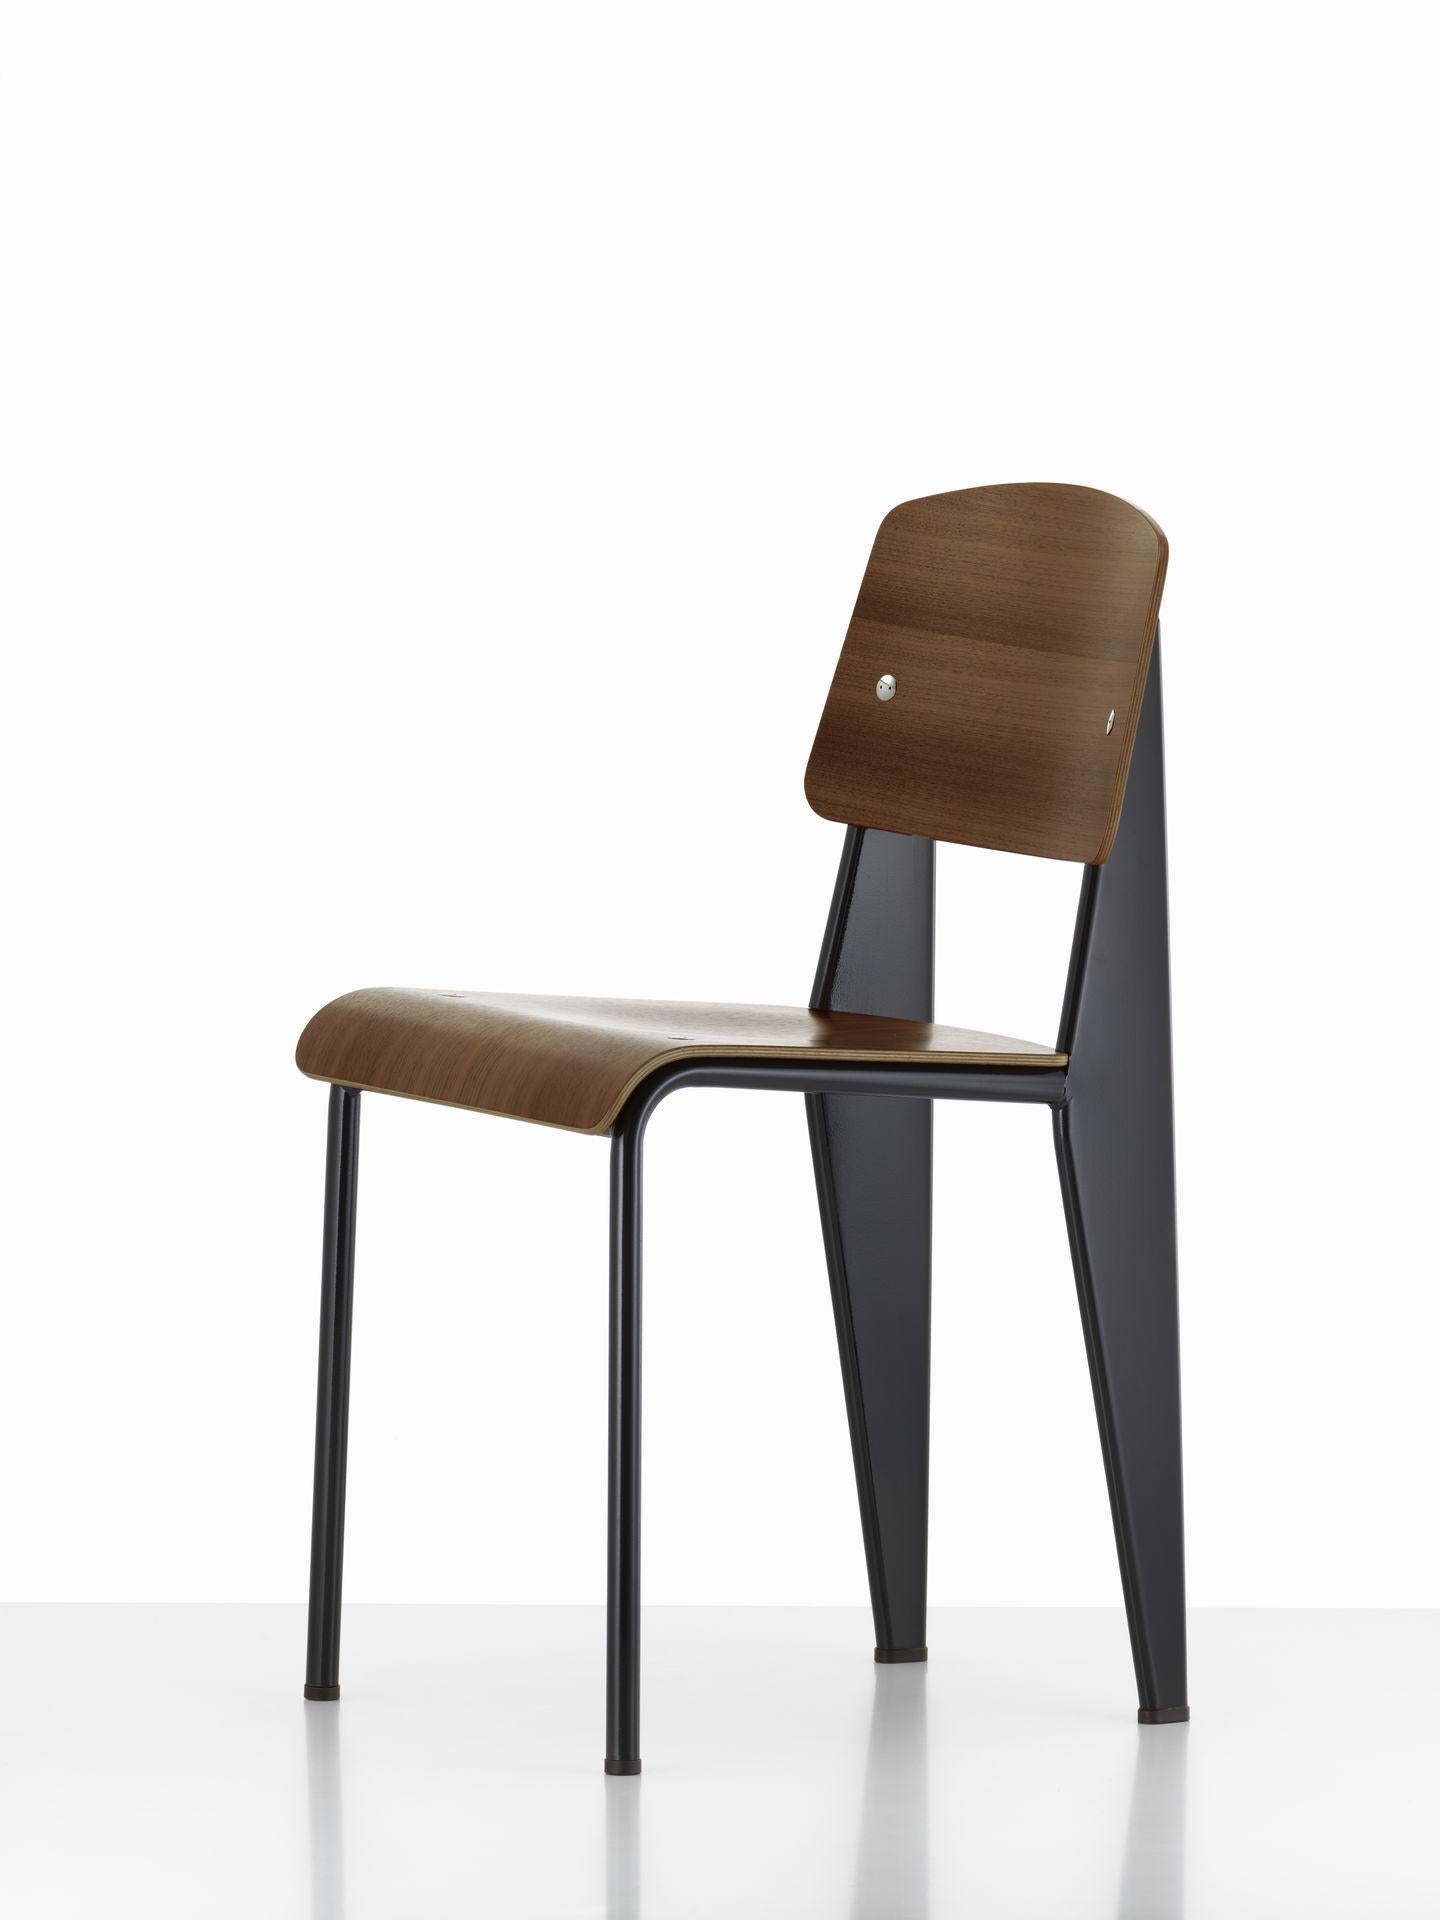 Chair designed by Jean Prouvé in 1934/50.
Manufactured by Vitra, Switzerland.

The Standard chair by Jean Prouvé has evolved into one of the most famous classics of the French 'constructeur'. The seat and backrest of this understated, iconic